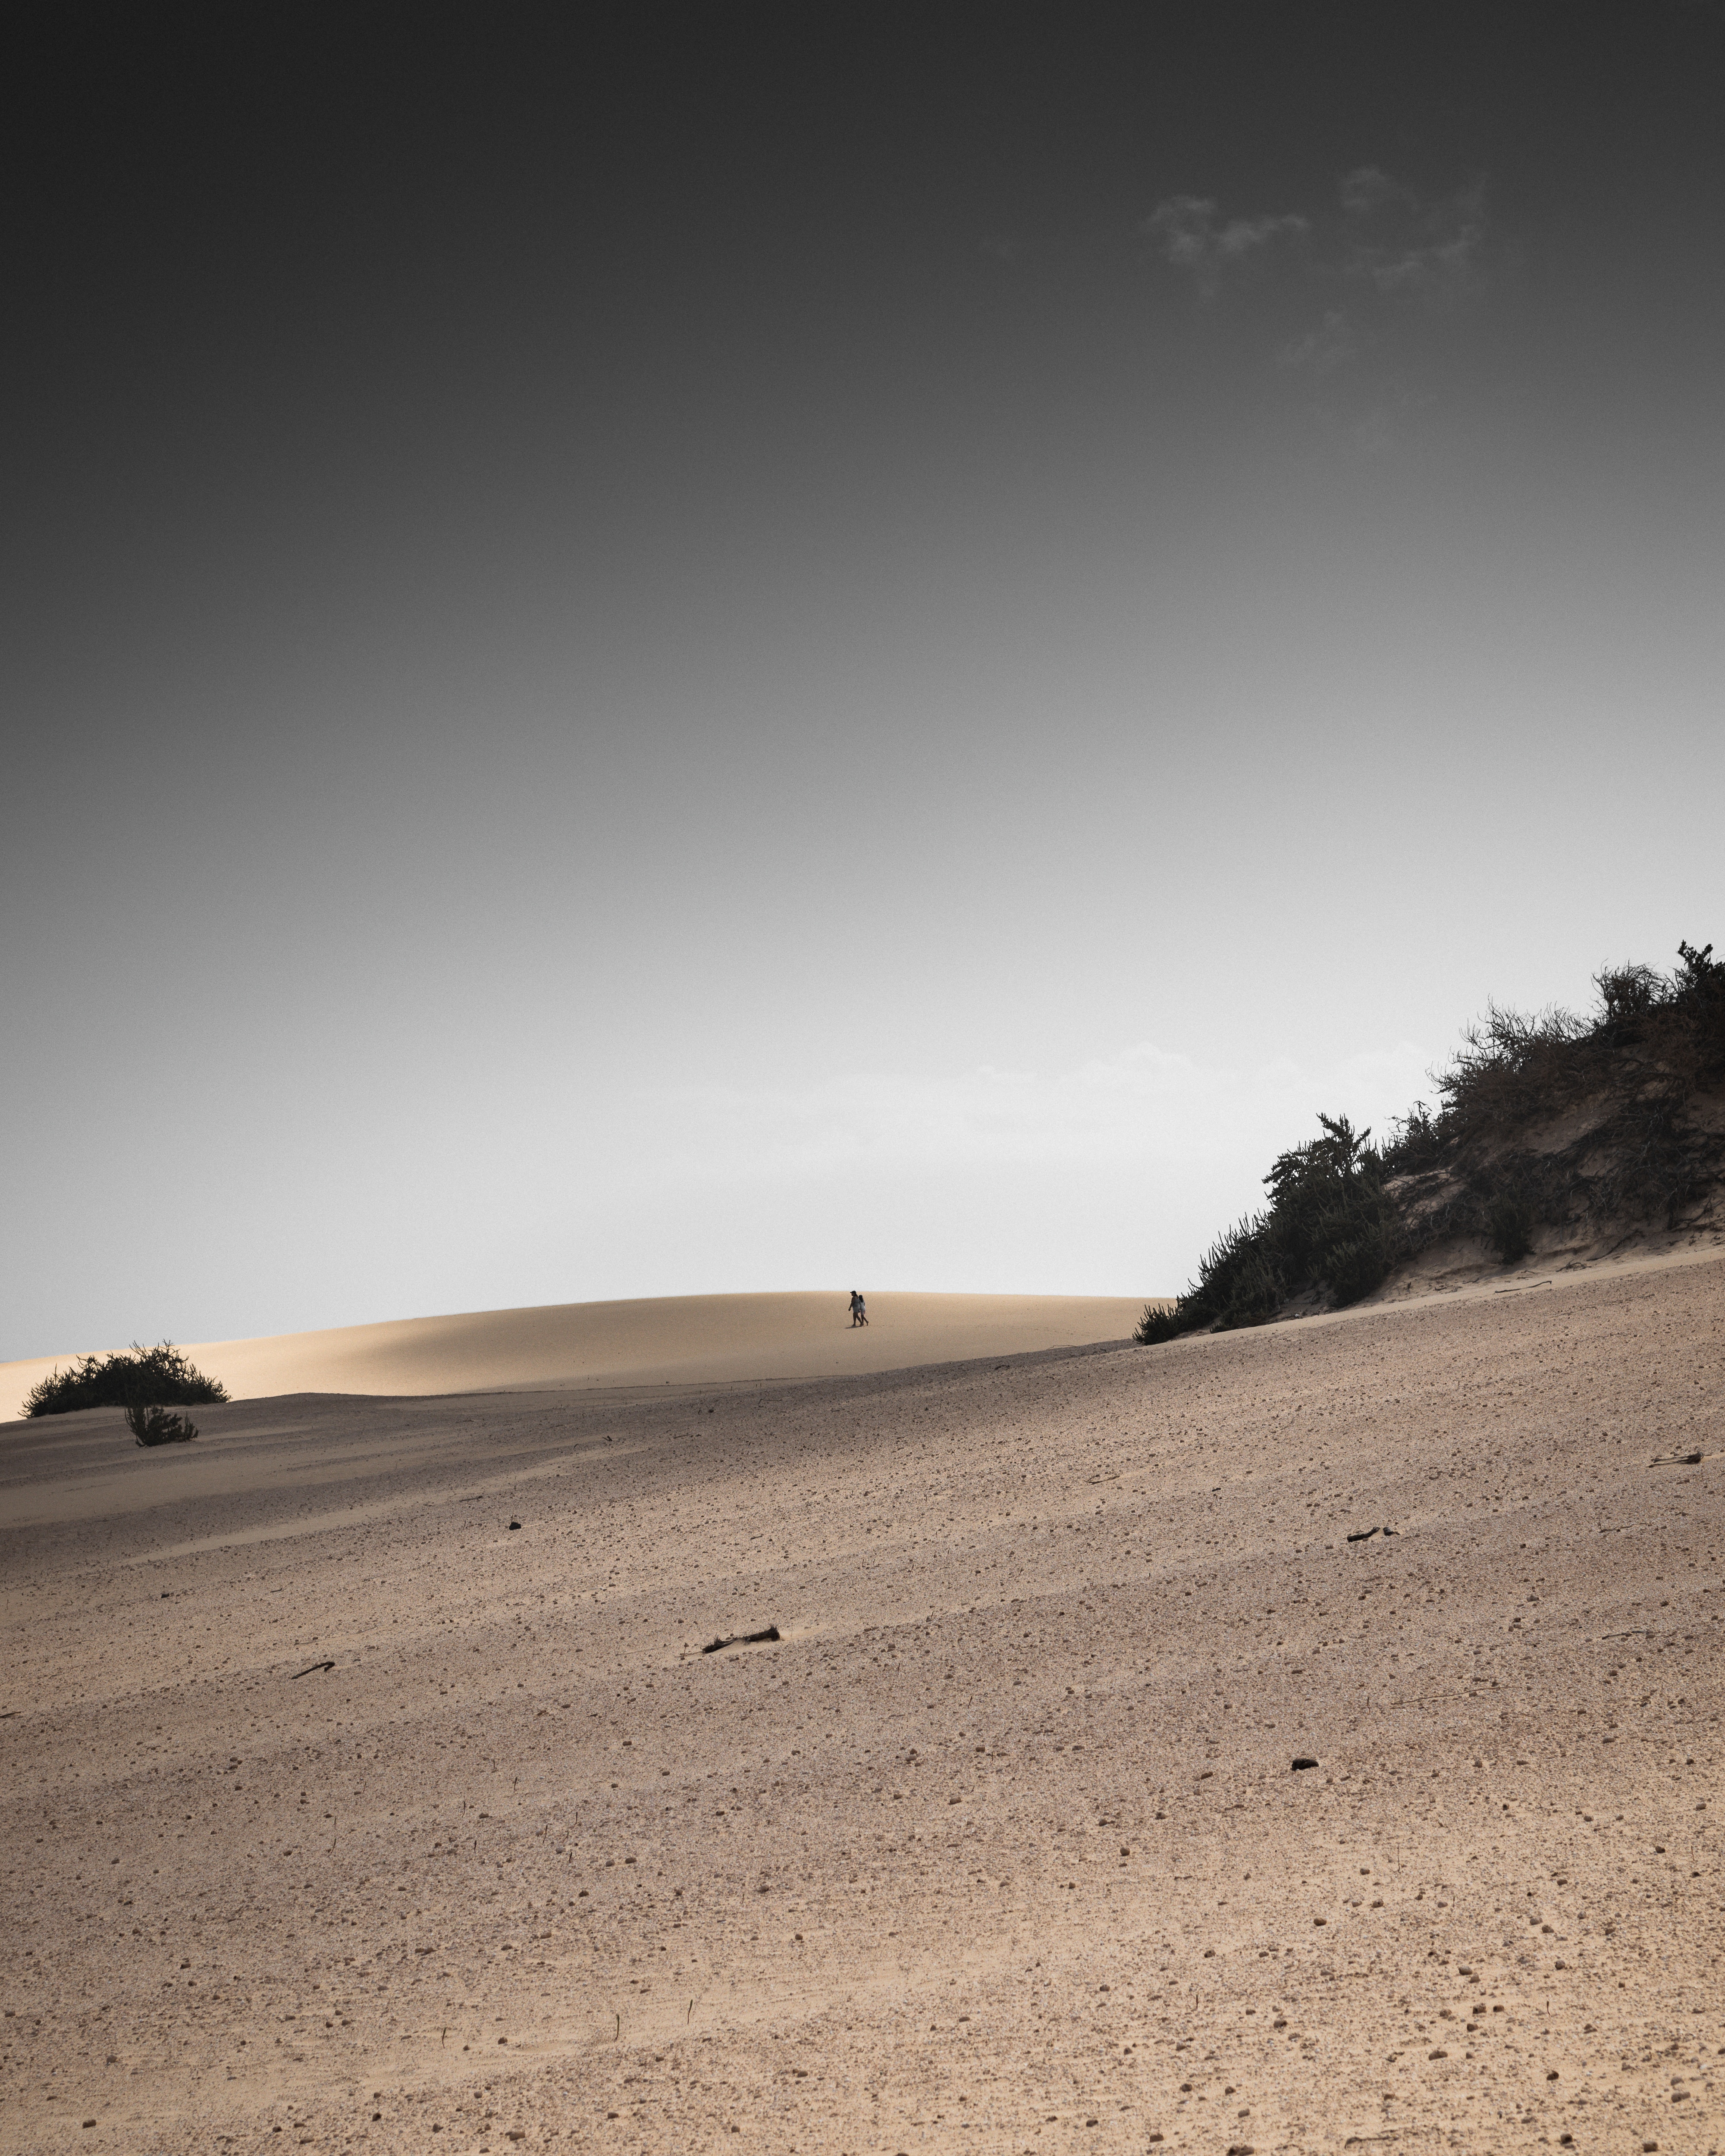 Wallpaper for mobile devices silhouettes, sand, landscape, nature